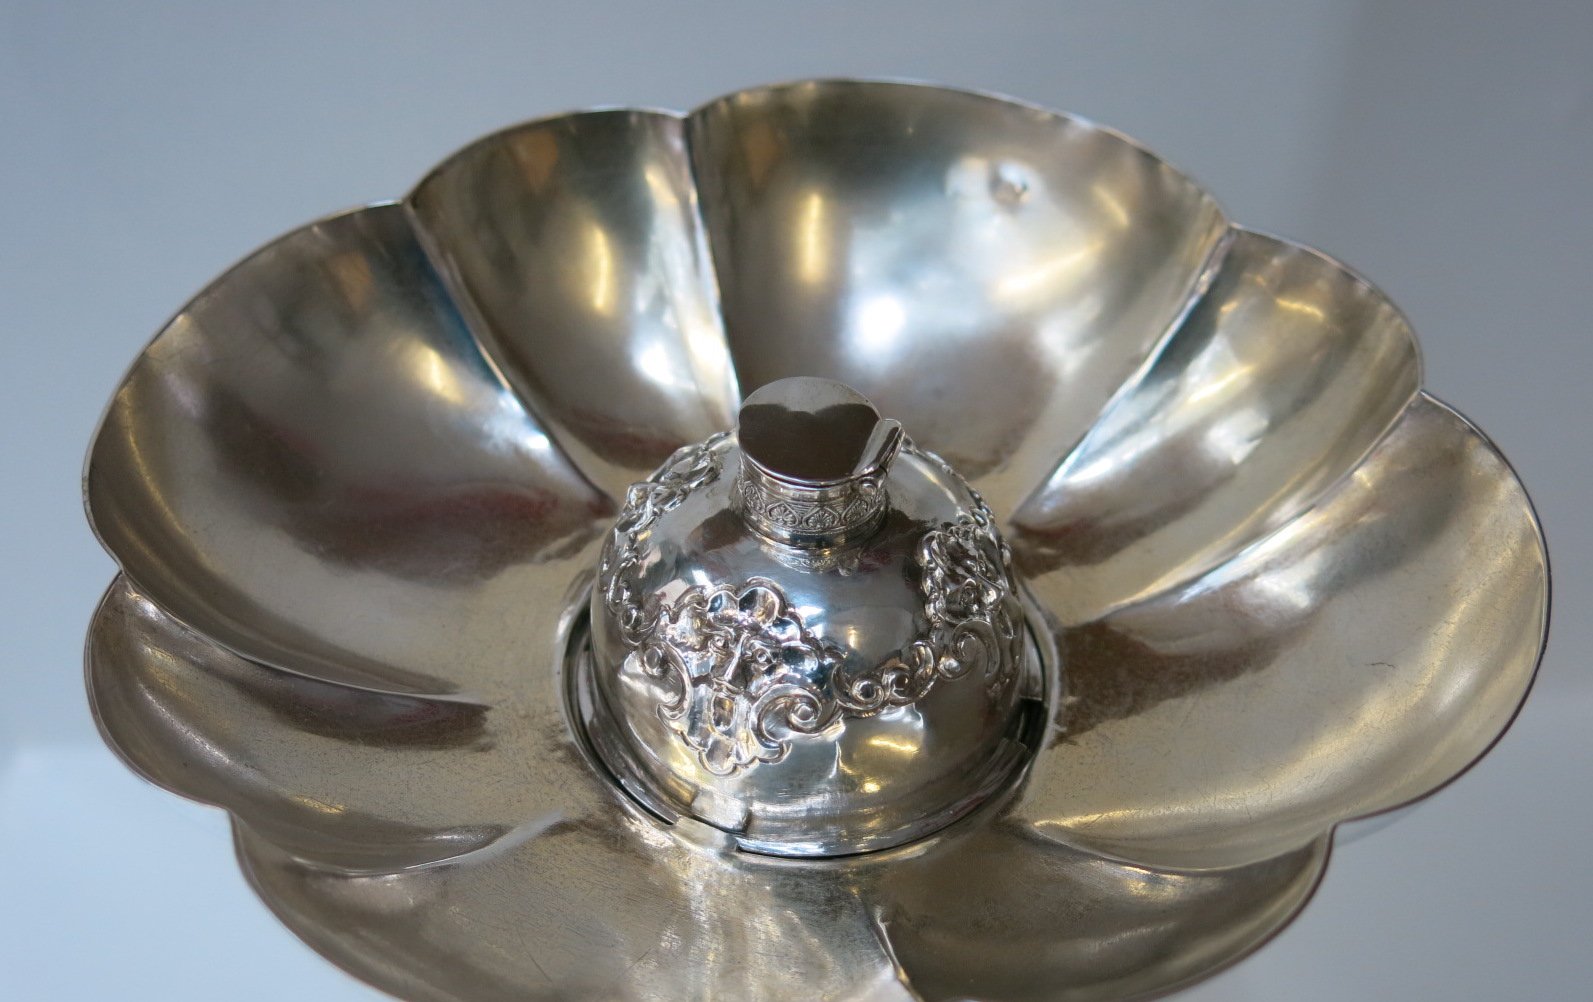 Silver cup detail